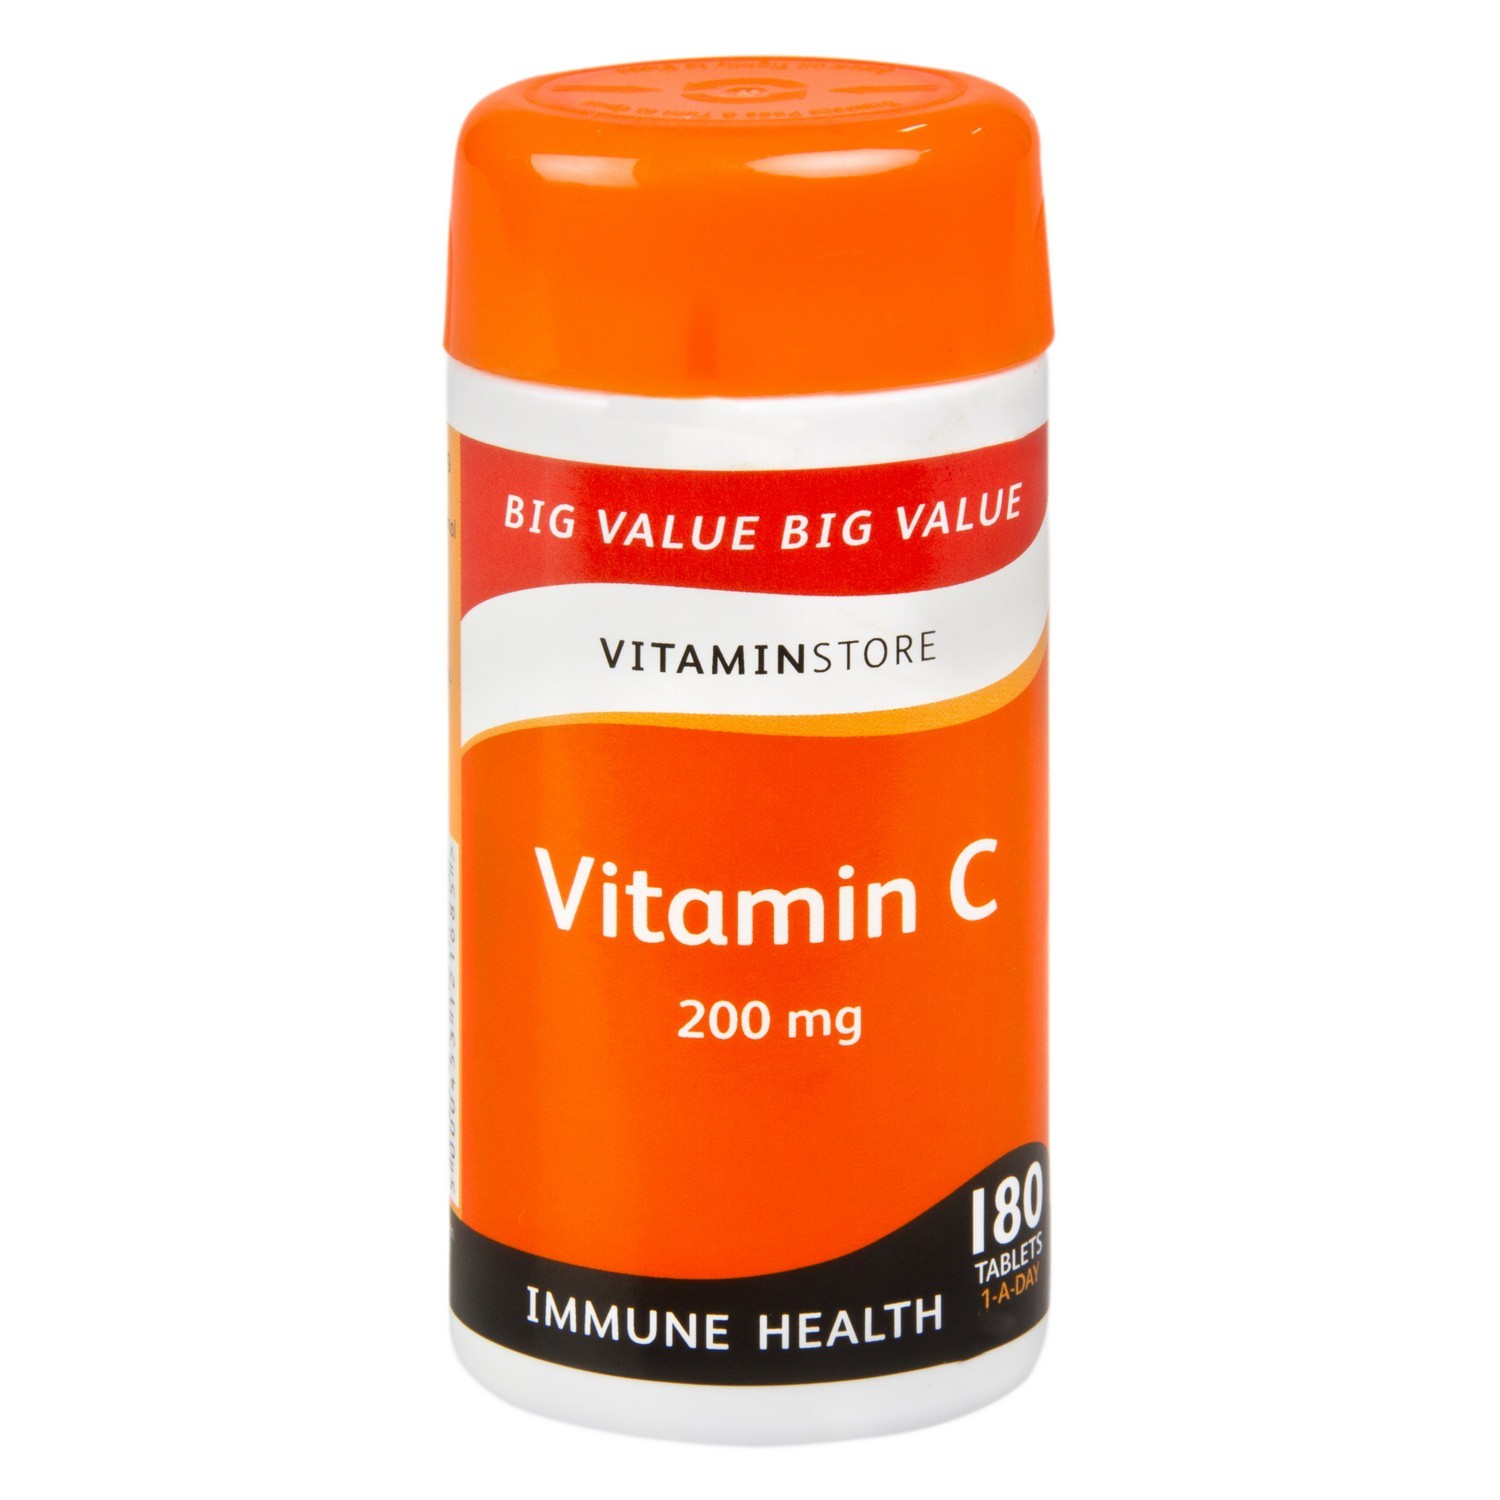 Pack of 200mg Vitamin C Tablets - 180 Image